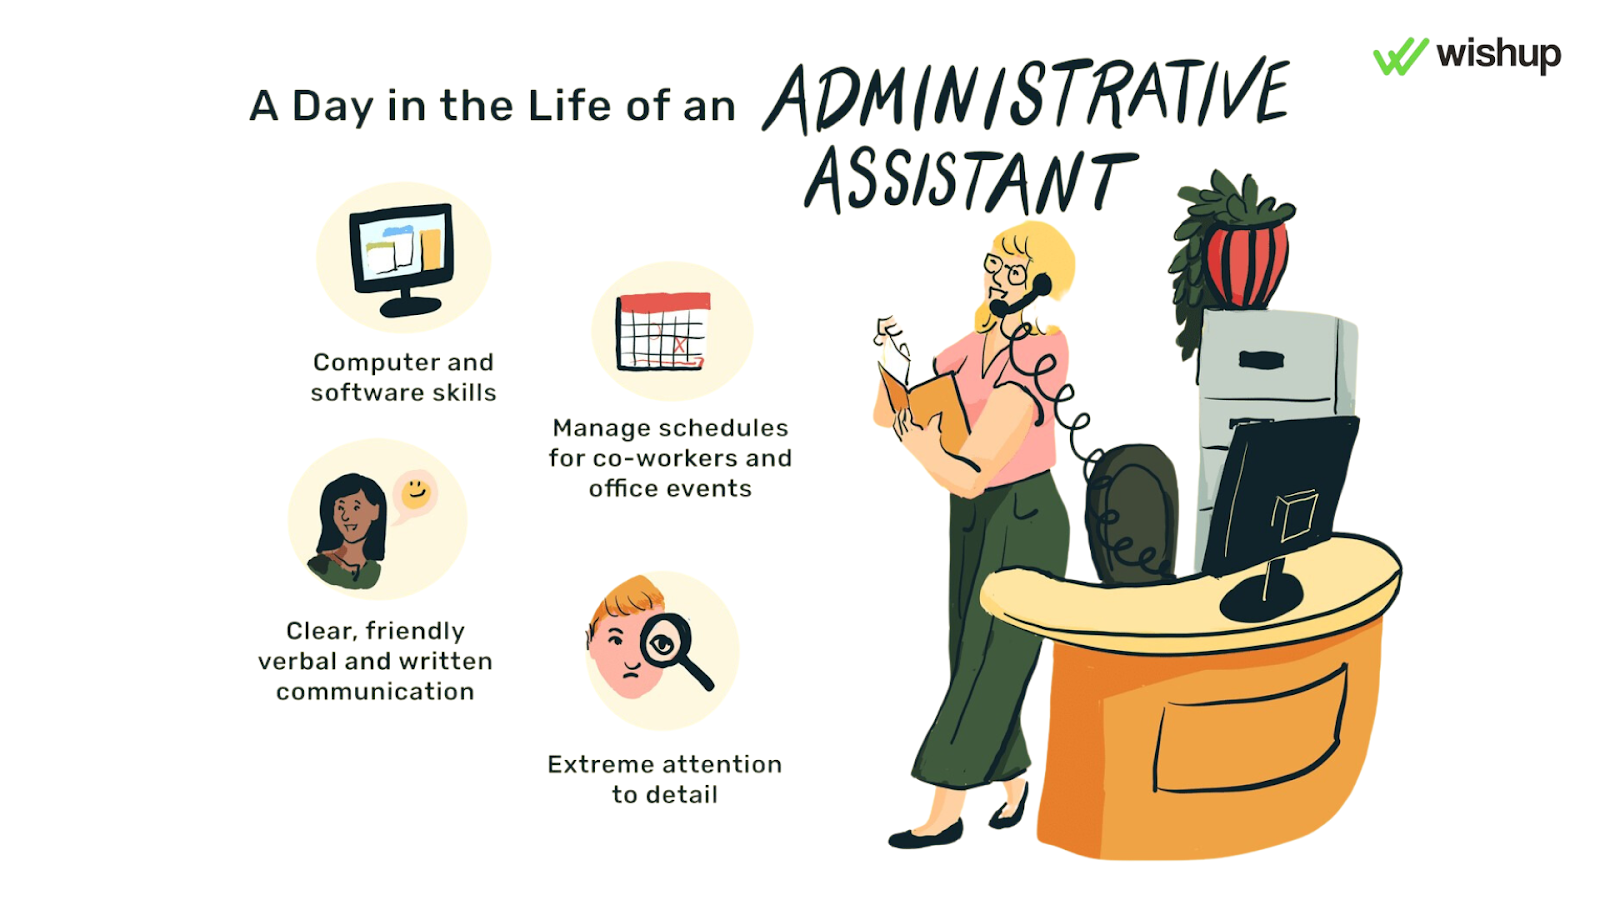 Know what an administrative assistant does.